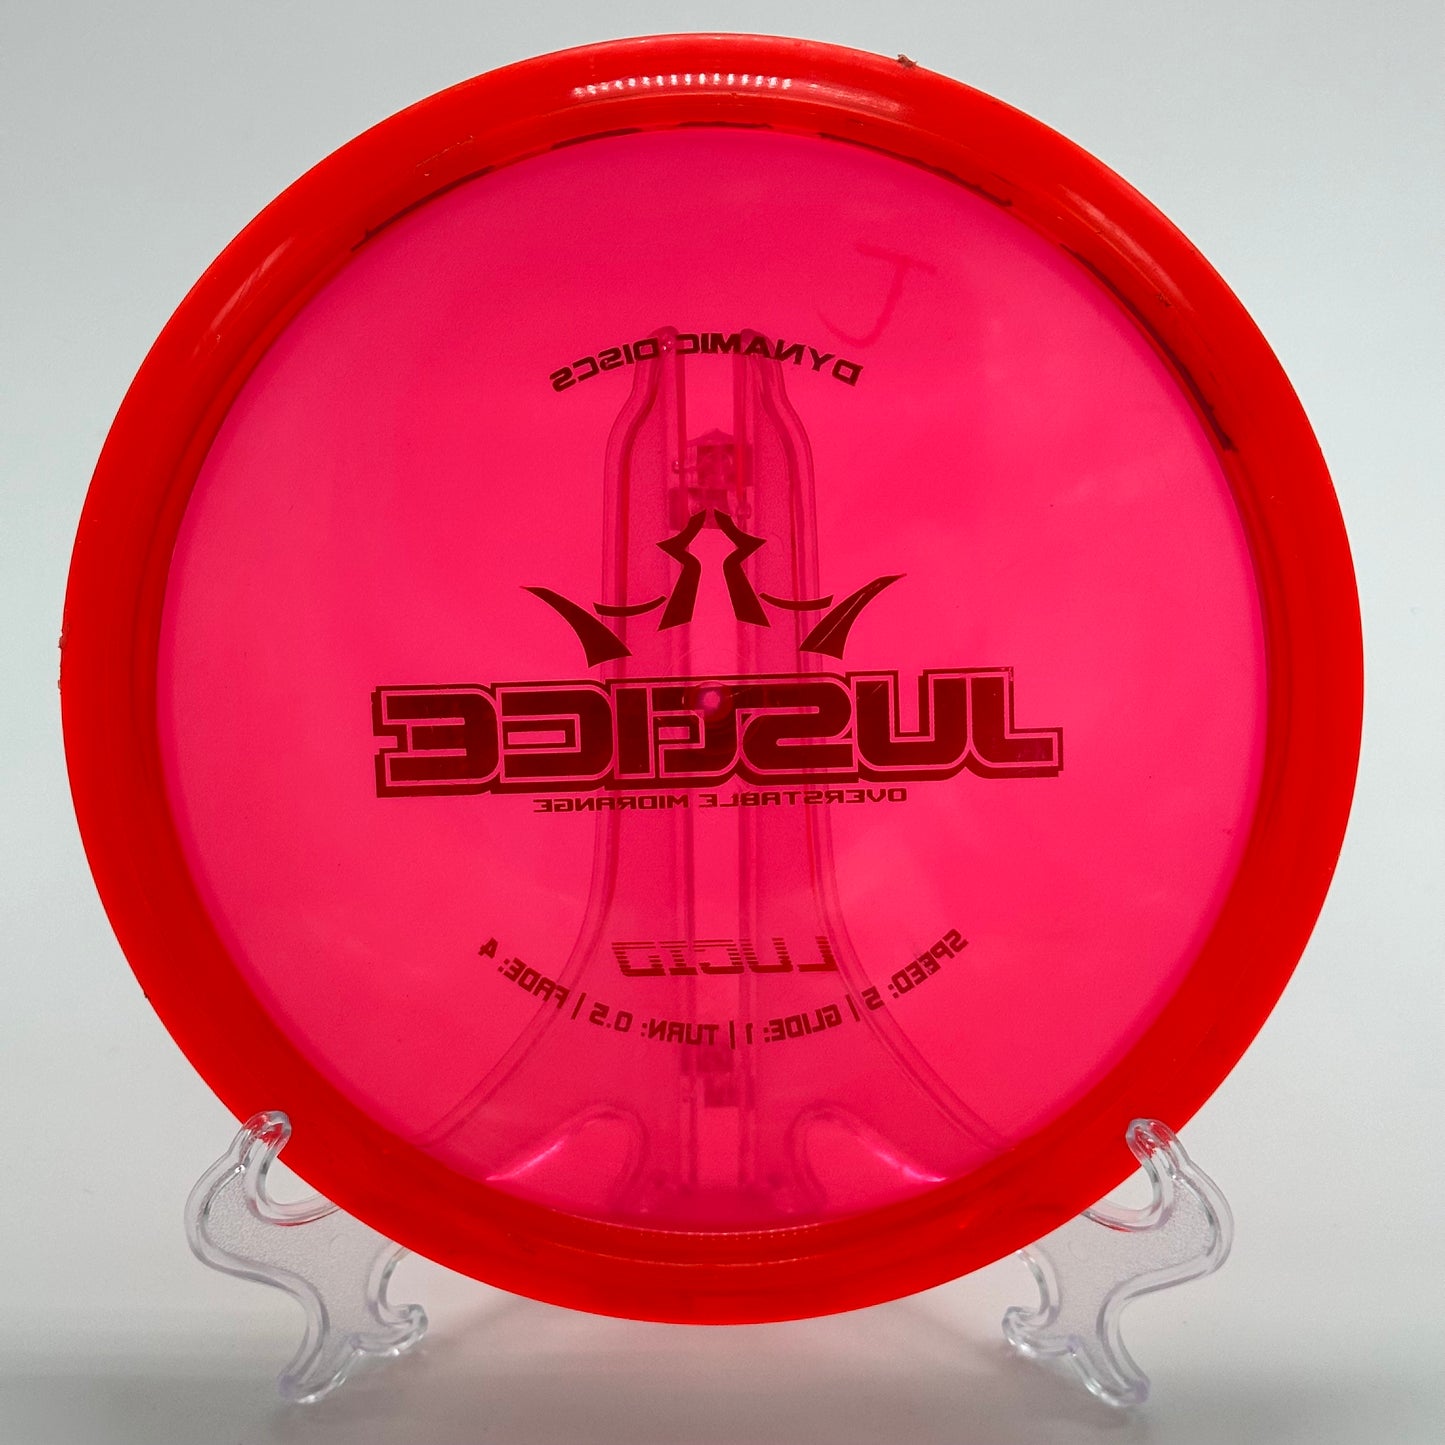 Dynamic Discs Justice | Lucid